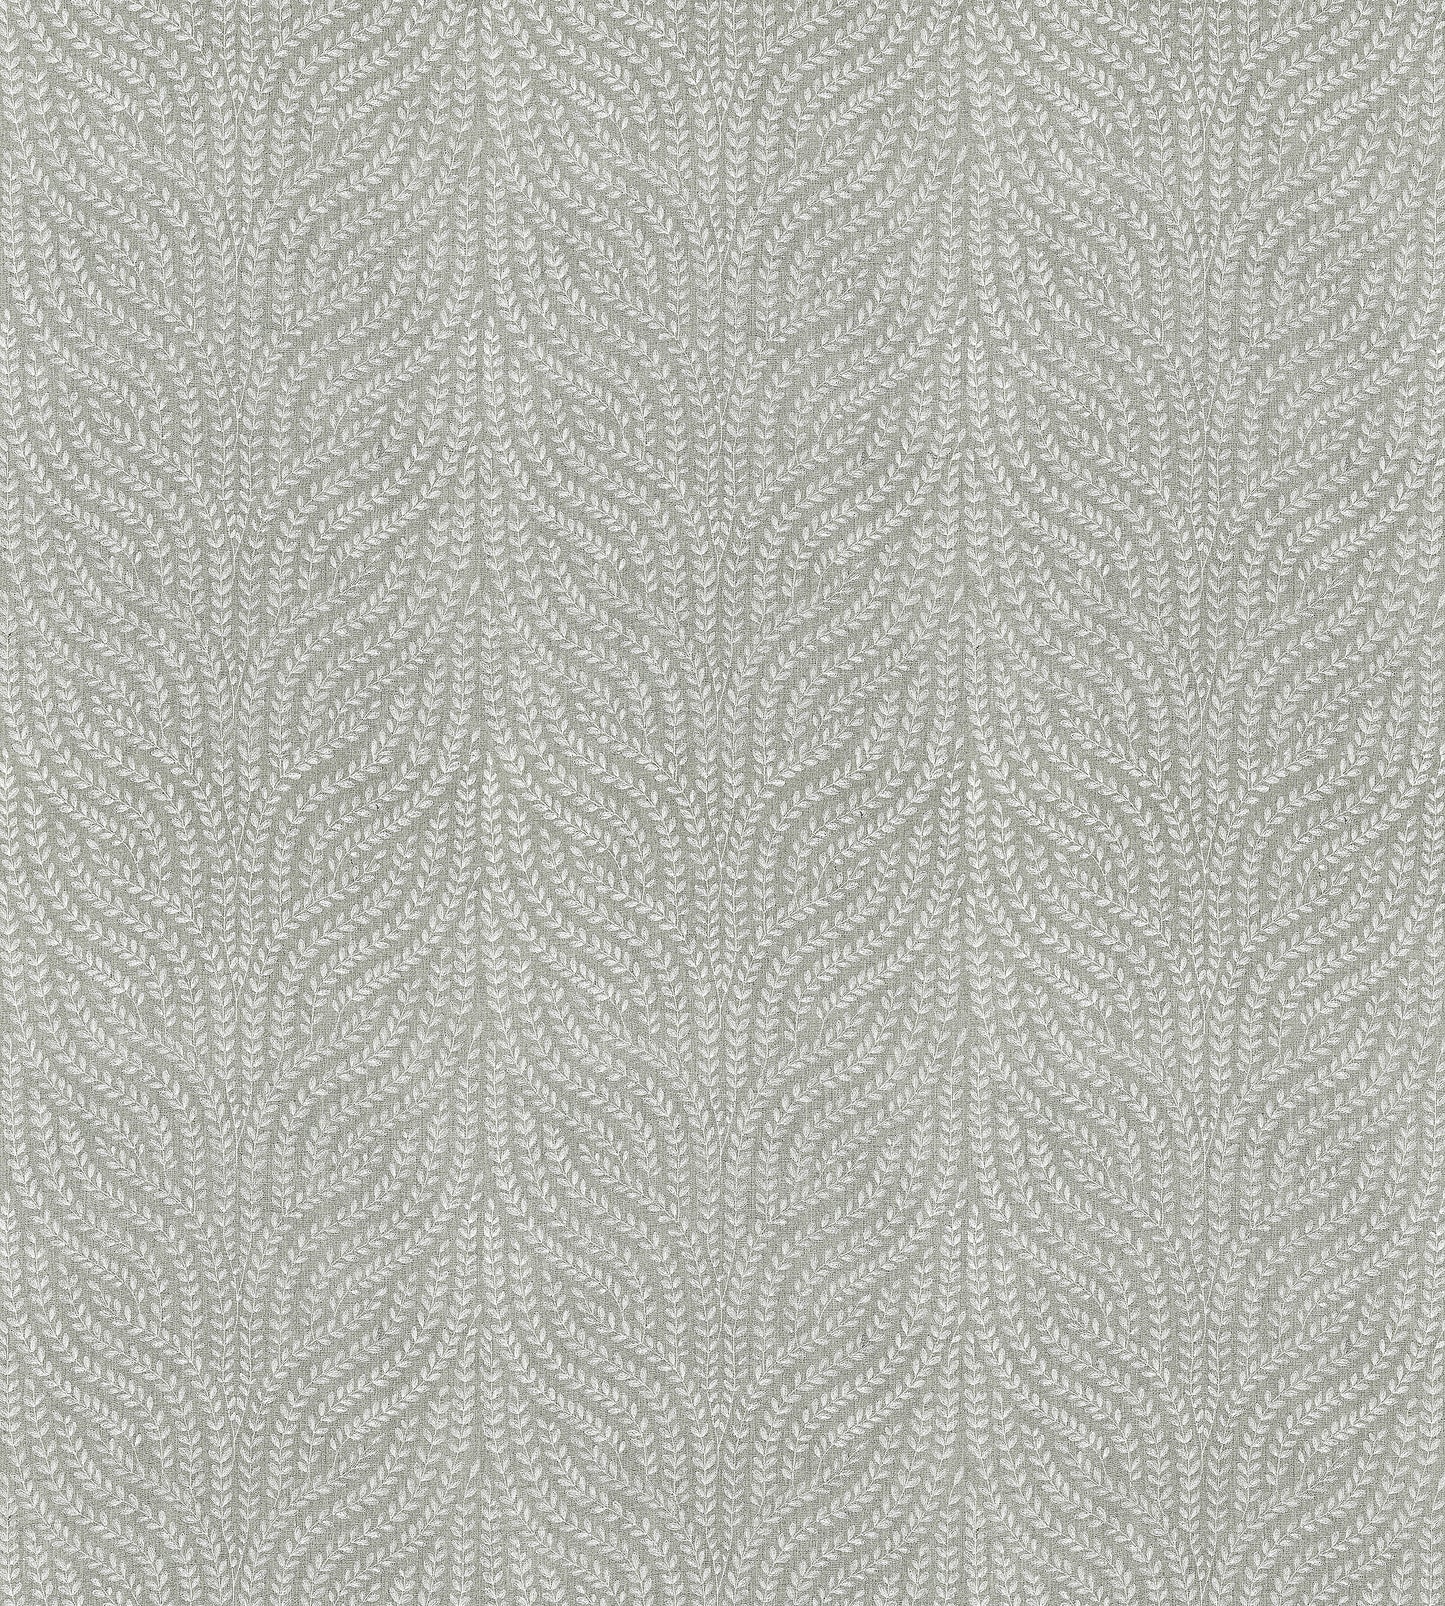 Purchase Scalamandre Fabric Pattern SC 000527125, Willow Vine Embroidery French Grey 3